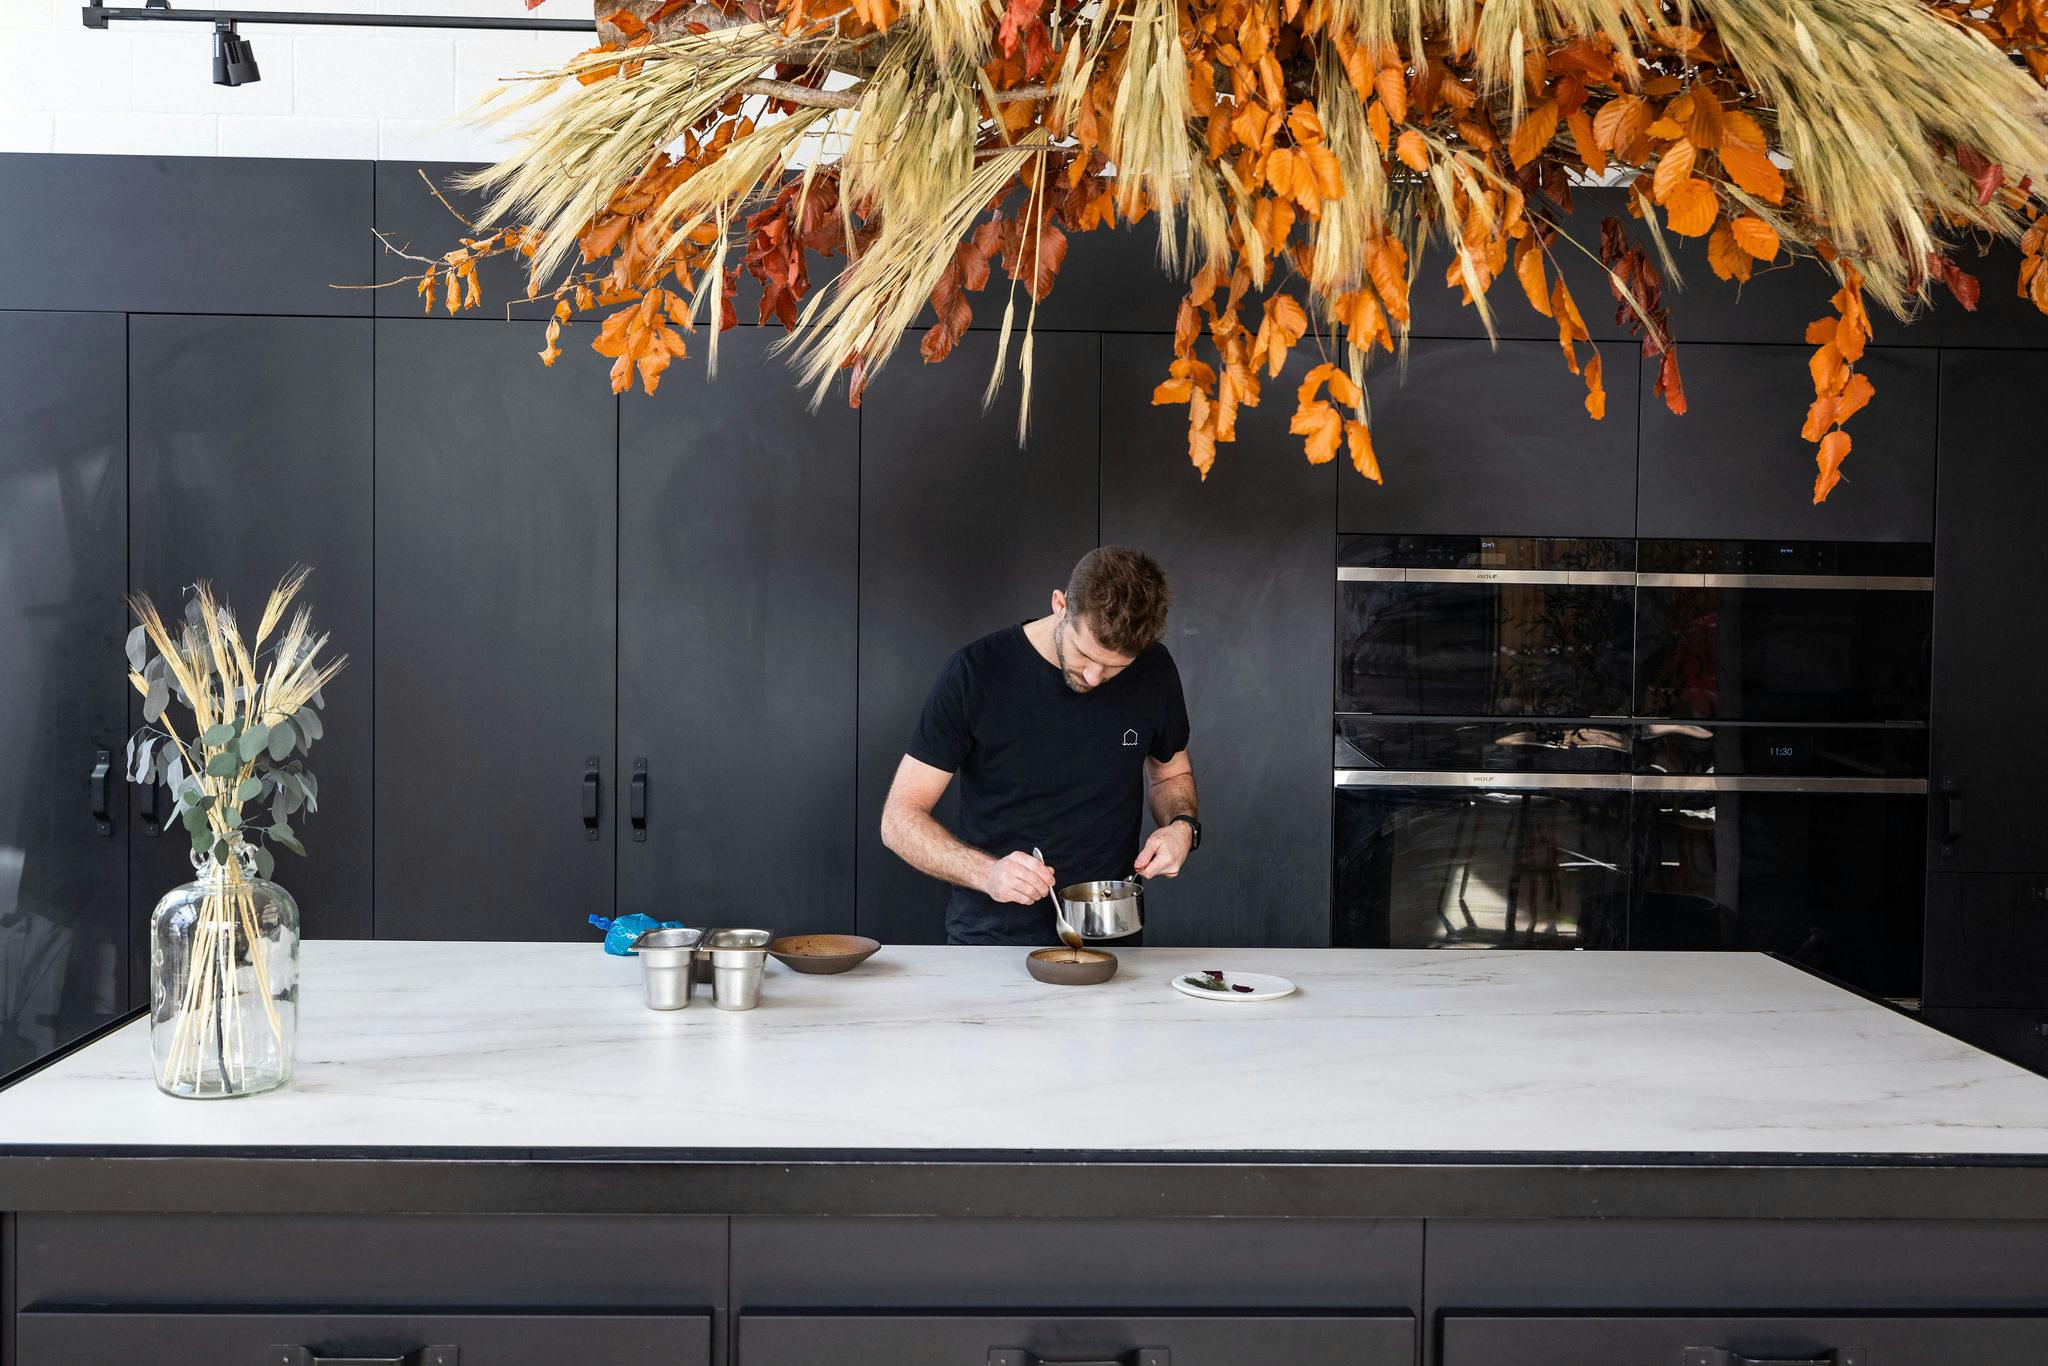 Numéro d'image 39 de la section actuelle de Design and technology come together in the new show cooking space of Spanish chef Javier Aranda de Cosentino France